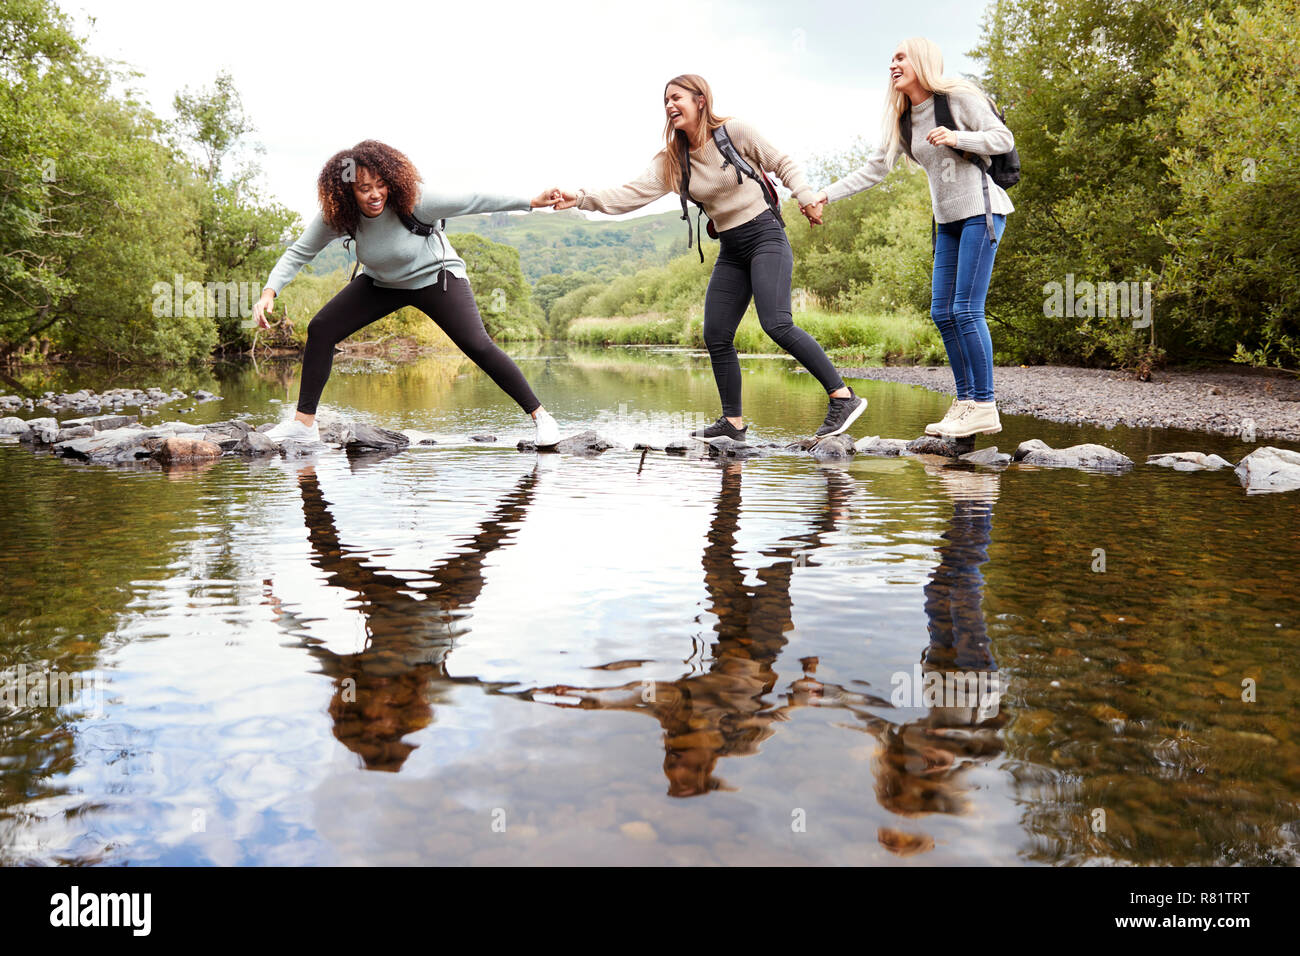 Three young adult women hold hands helping each other while carefully crossing a stream on stones during a hike Stock Photo